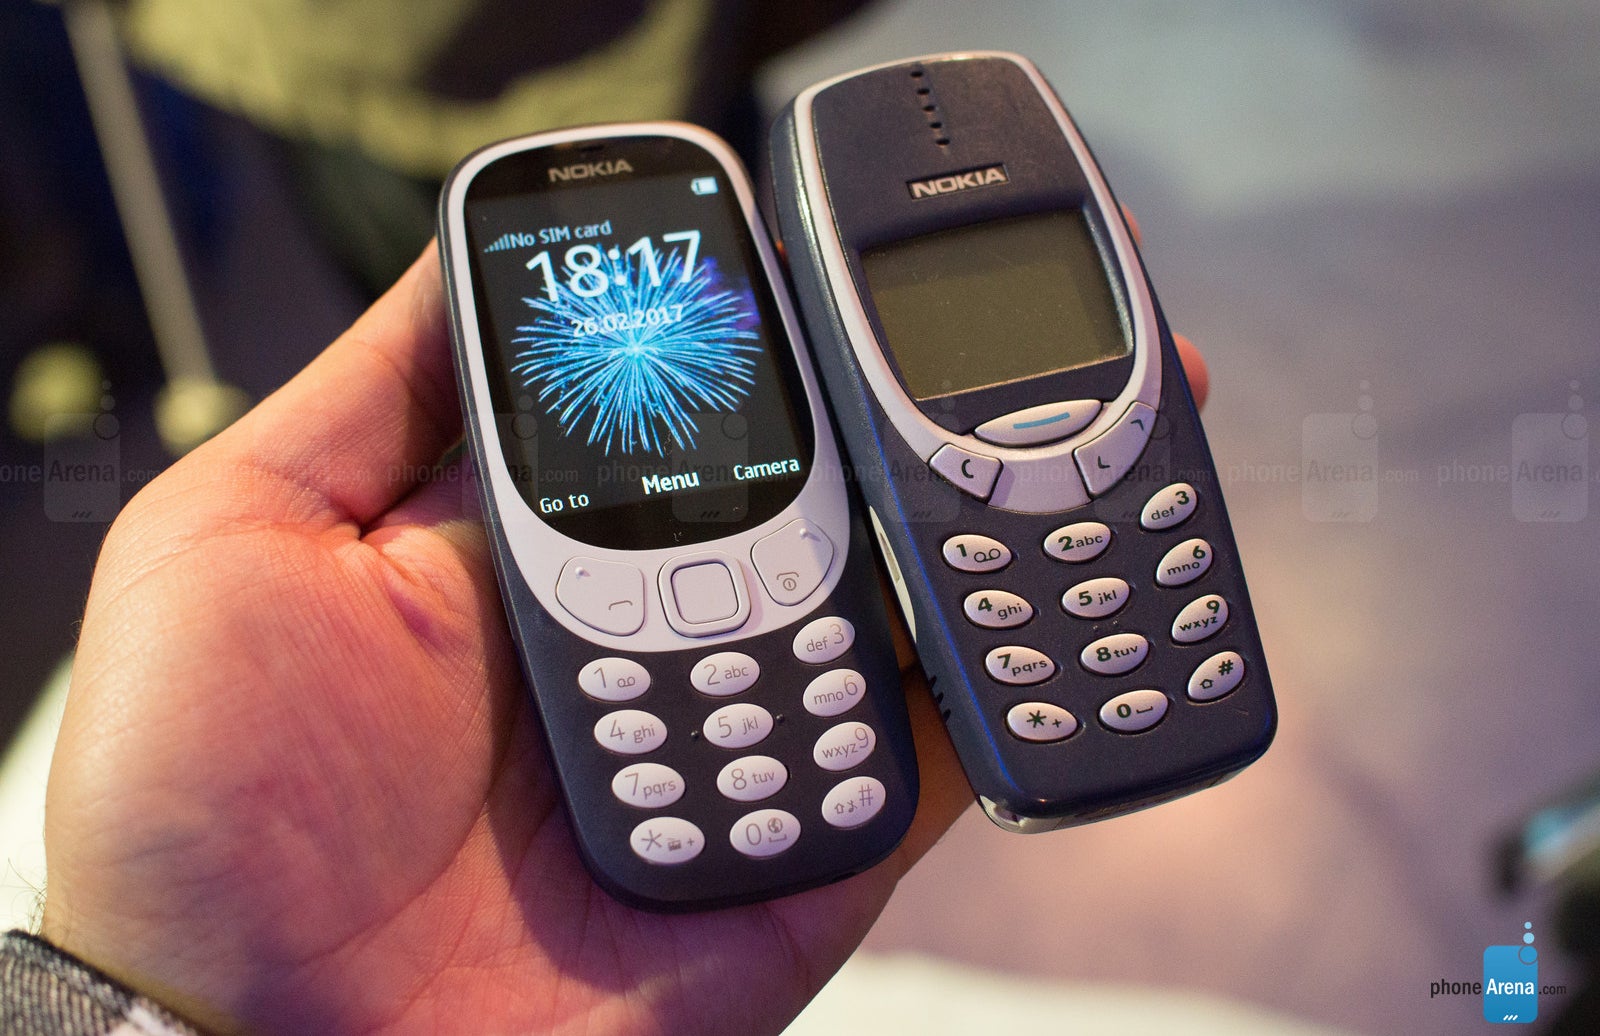 Would you buy the new Nokia 3310? (Poll results)